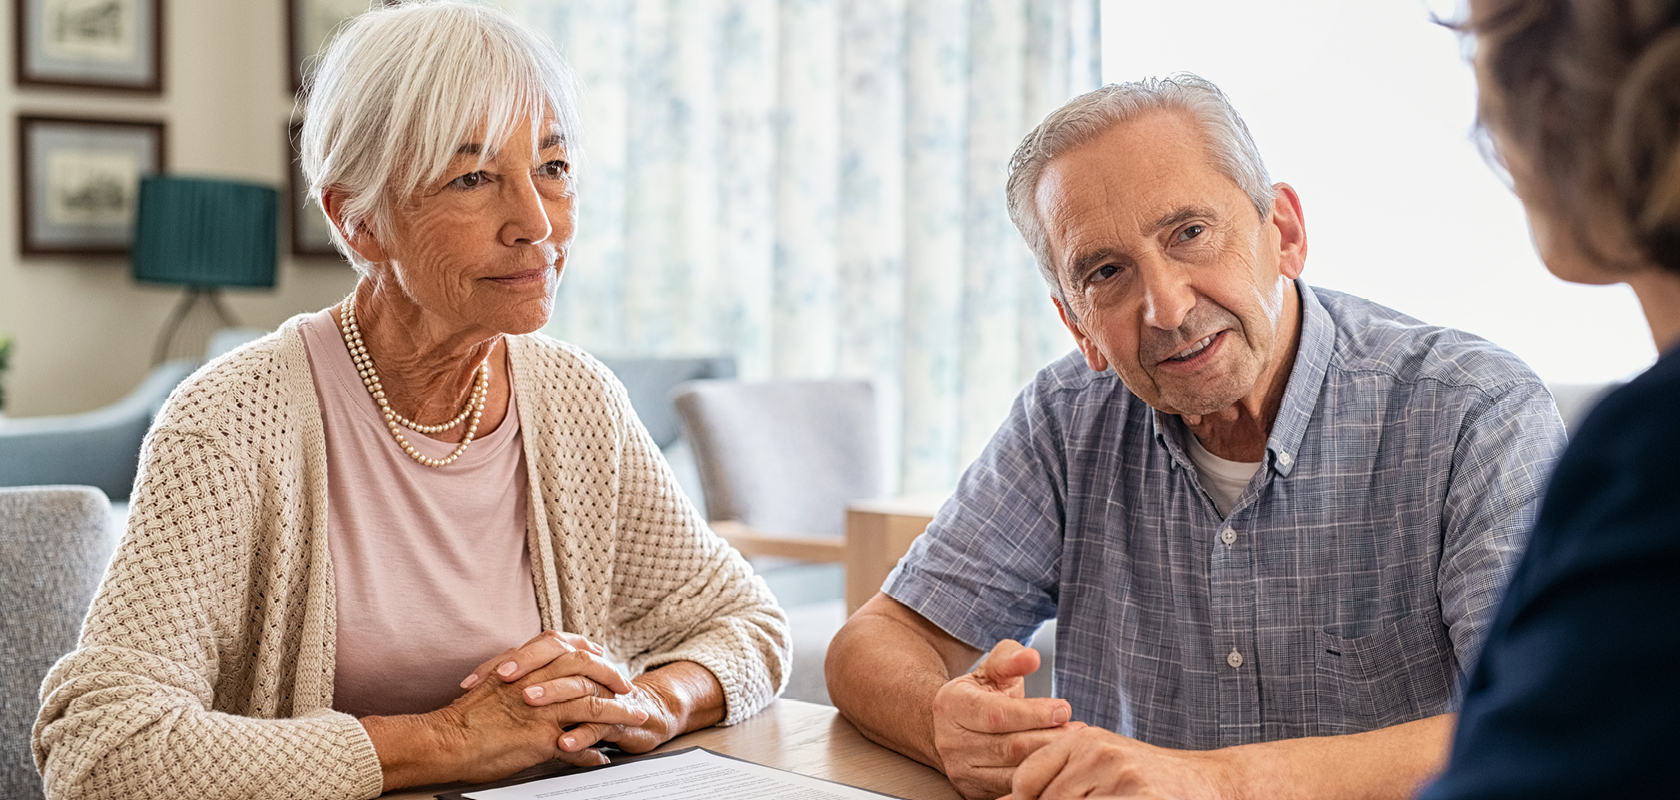 Senior man and woman at table discussing end-of-life care